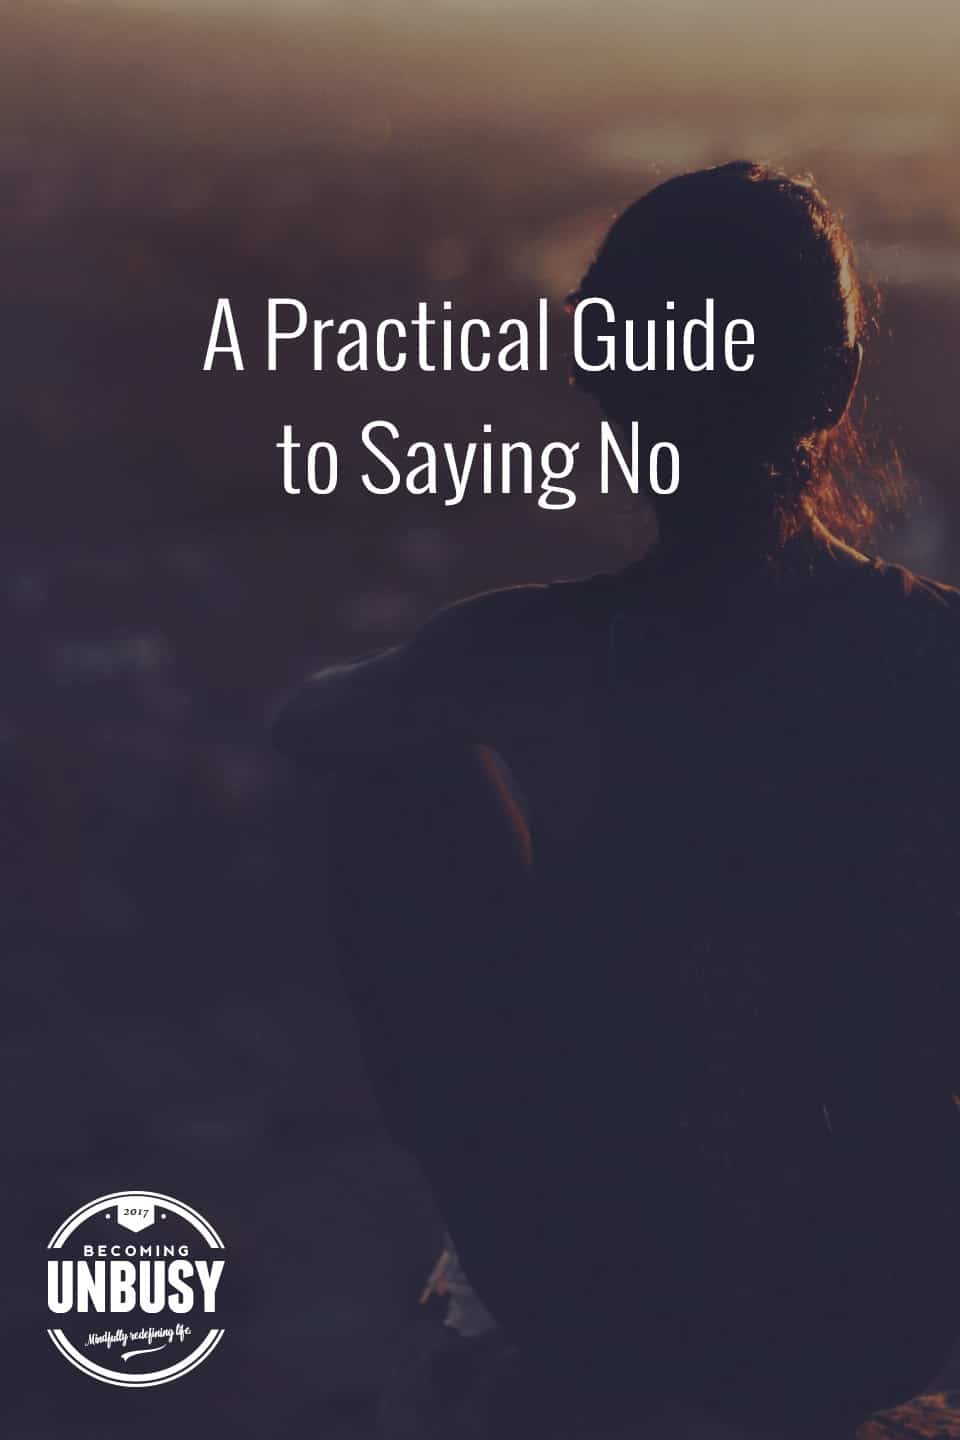 Loving this guide for saying NO and this Becoming UnBusy site